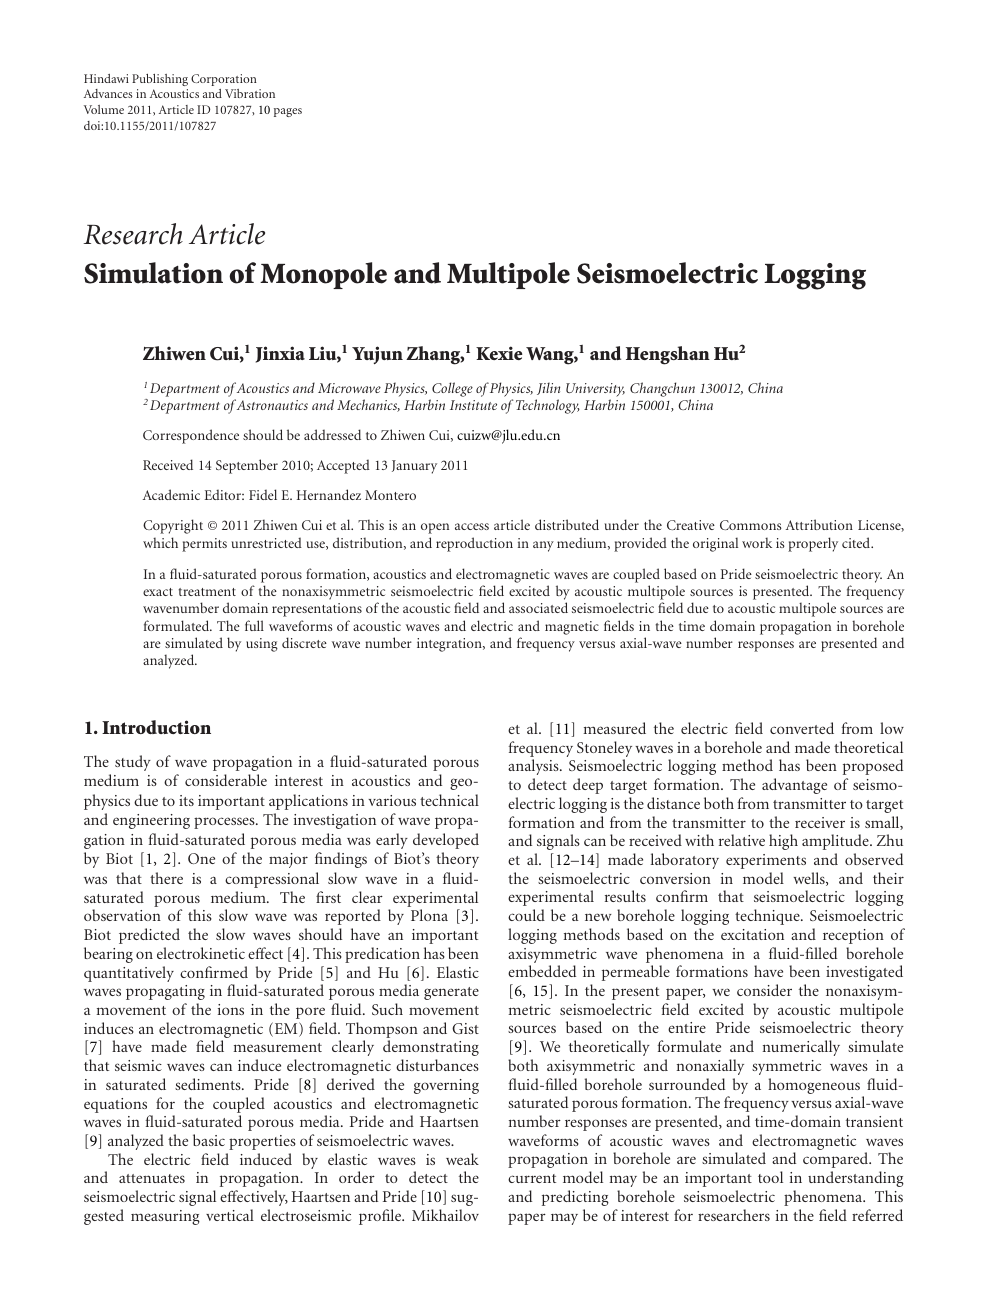 Simulation Of Monopole And Multipole Seismoelectric Logging Topic Of Research Paper In Mathematics Download Scholarly Article Pdf And Read For Free On Cyberleninka Open Science Hub